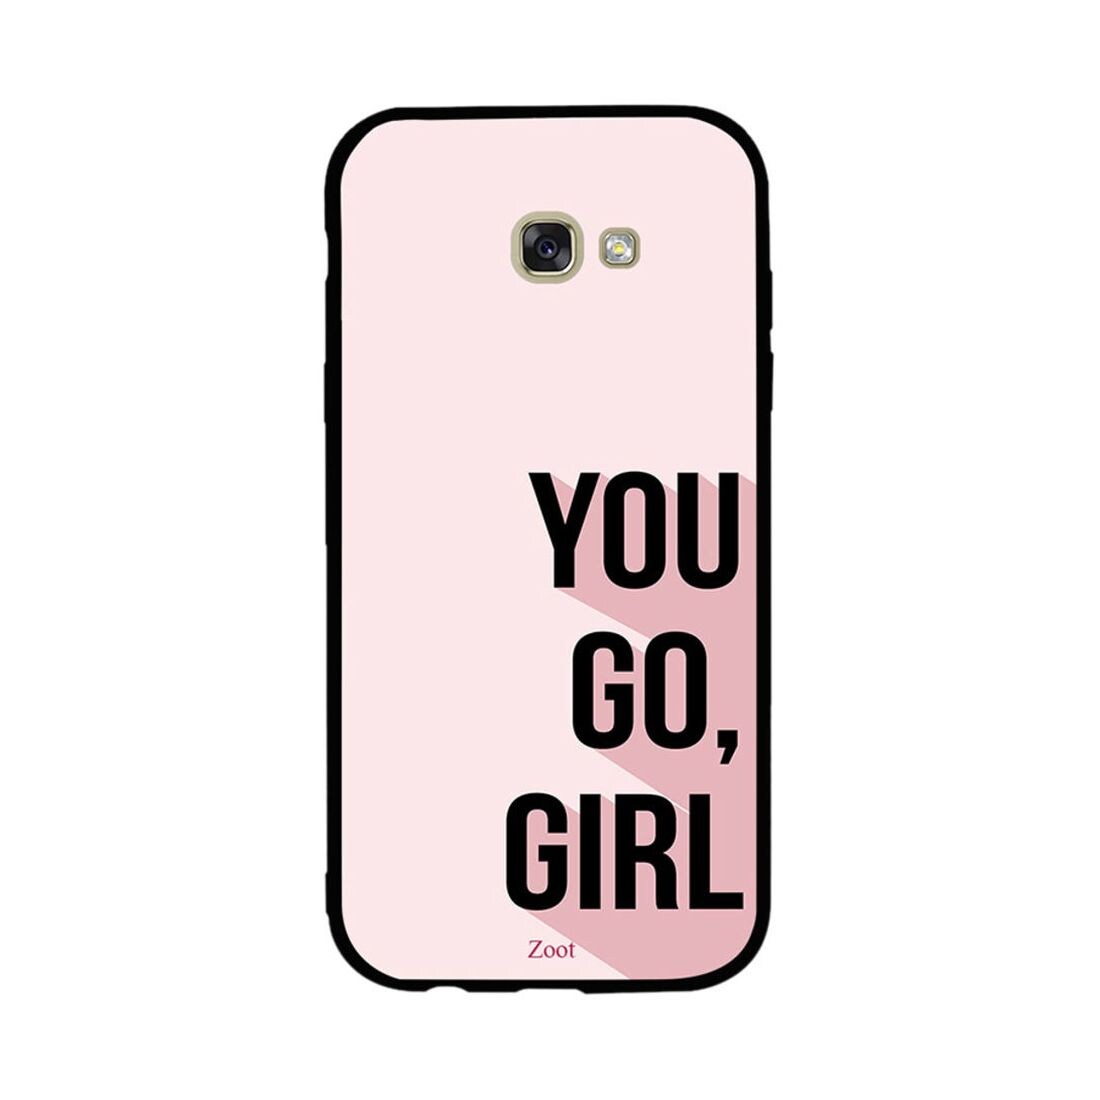 Thermoplastic Polyurethane Protective Case Cover For Samsung Galaxy A7 (2017) You Go Girl